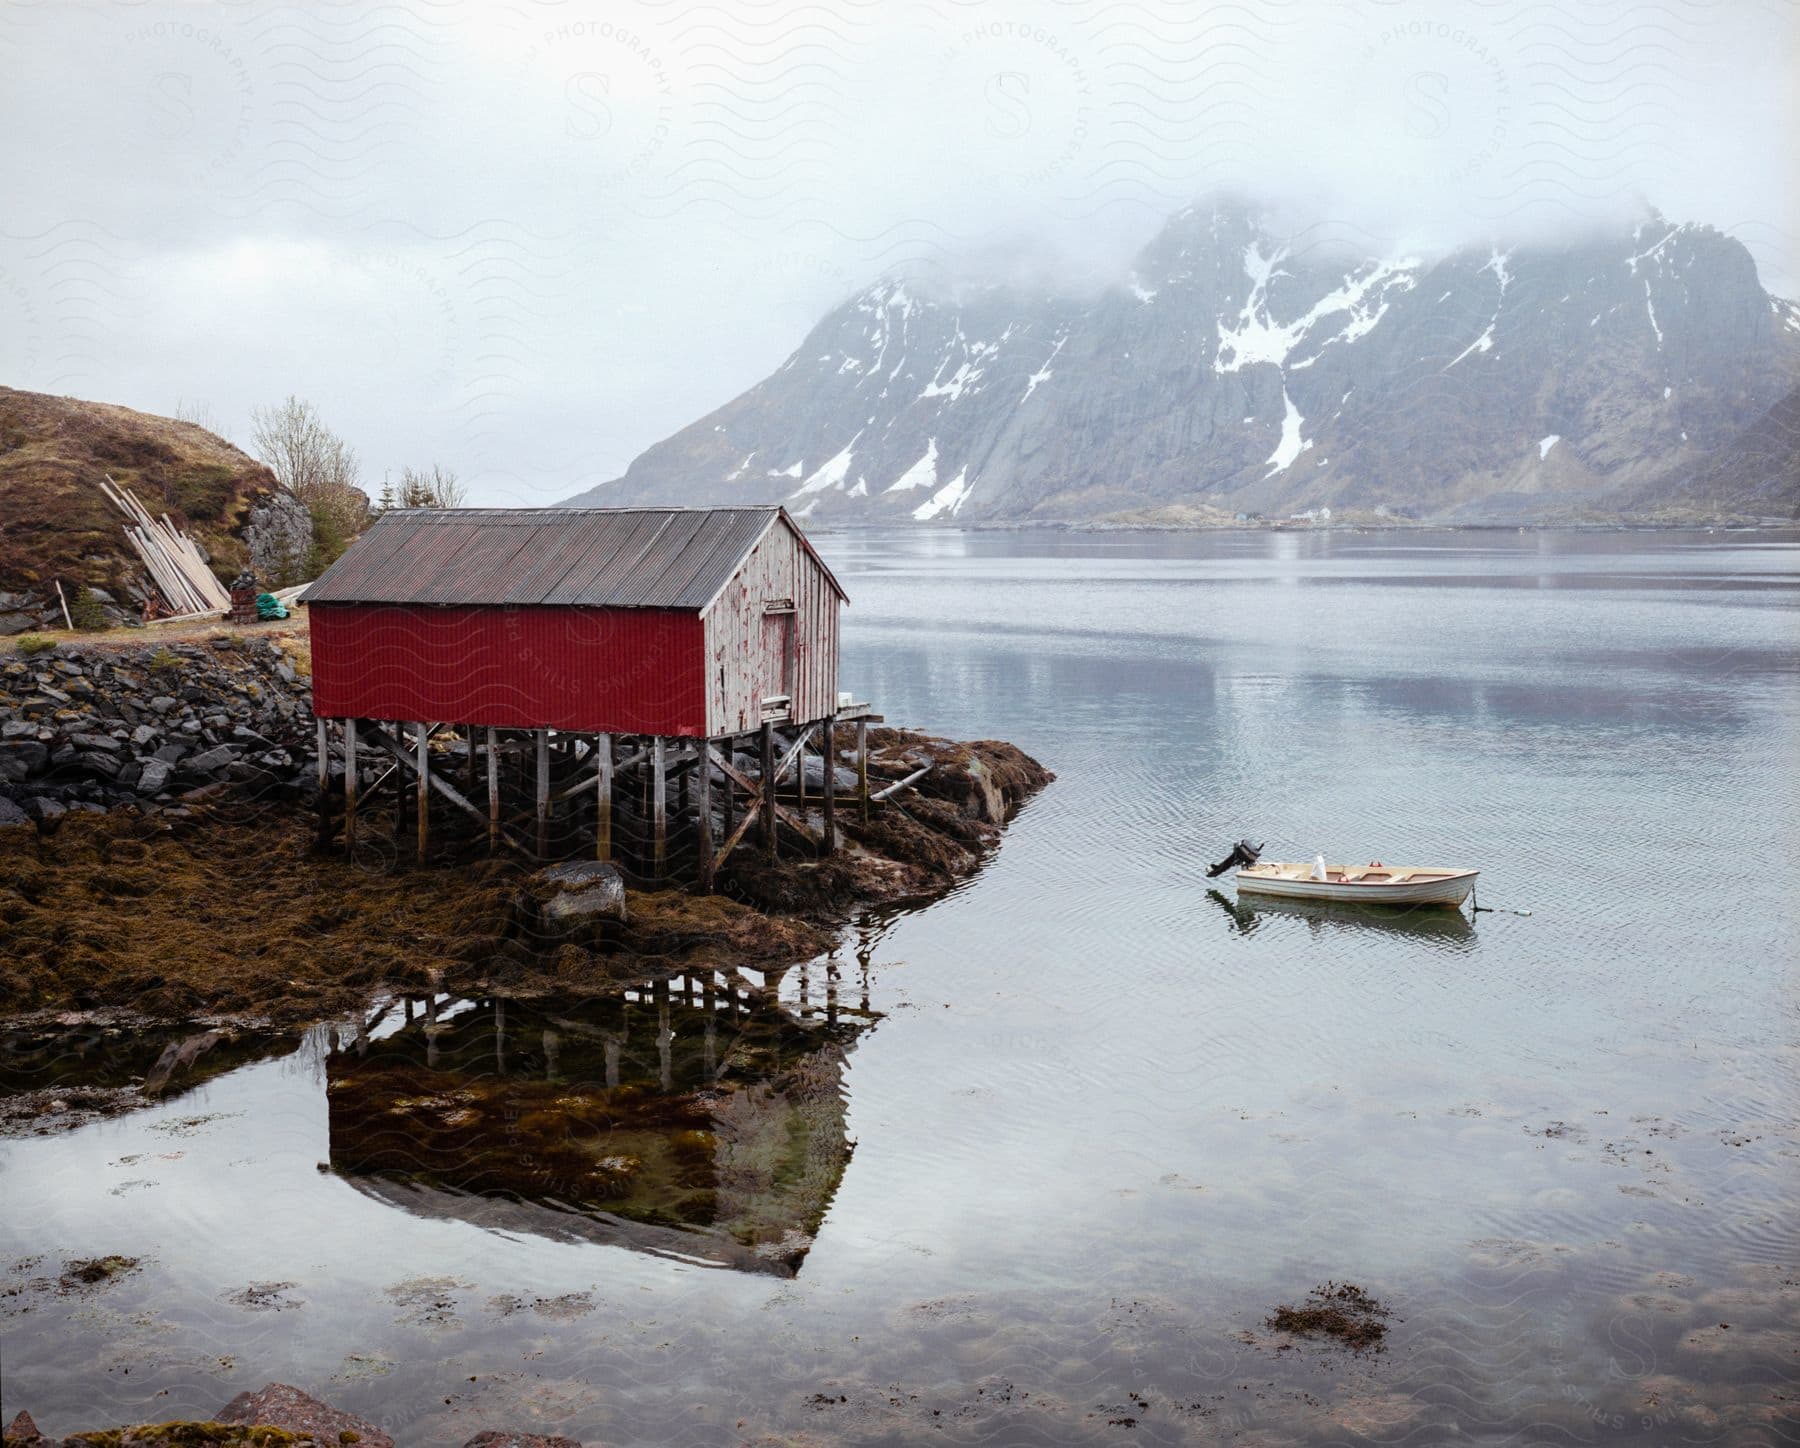 A small boat sits in the water near a shed on the coast of a mountain lake